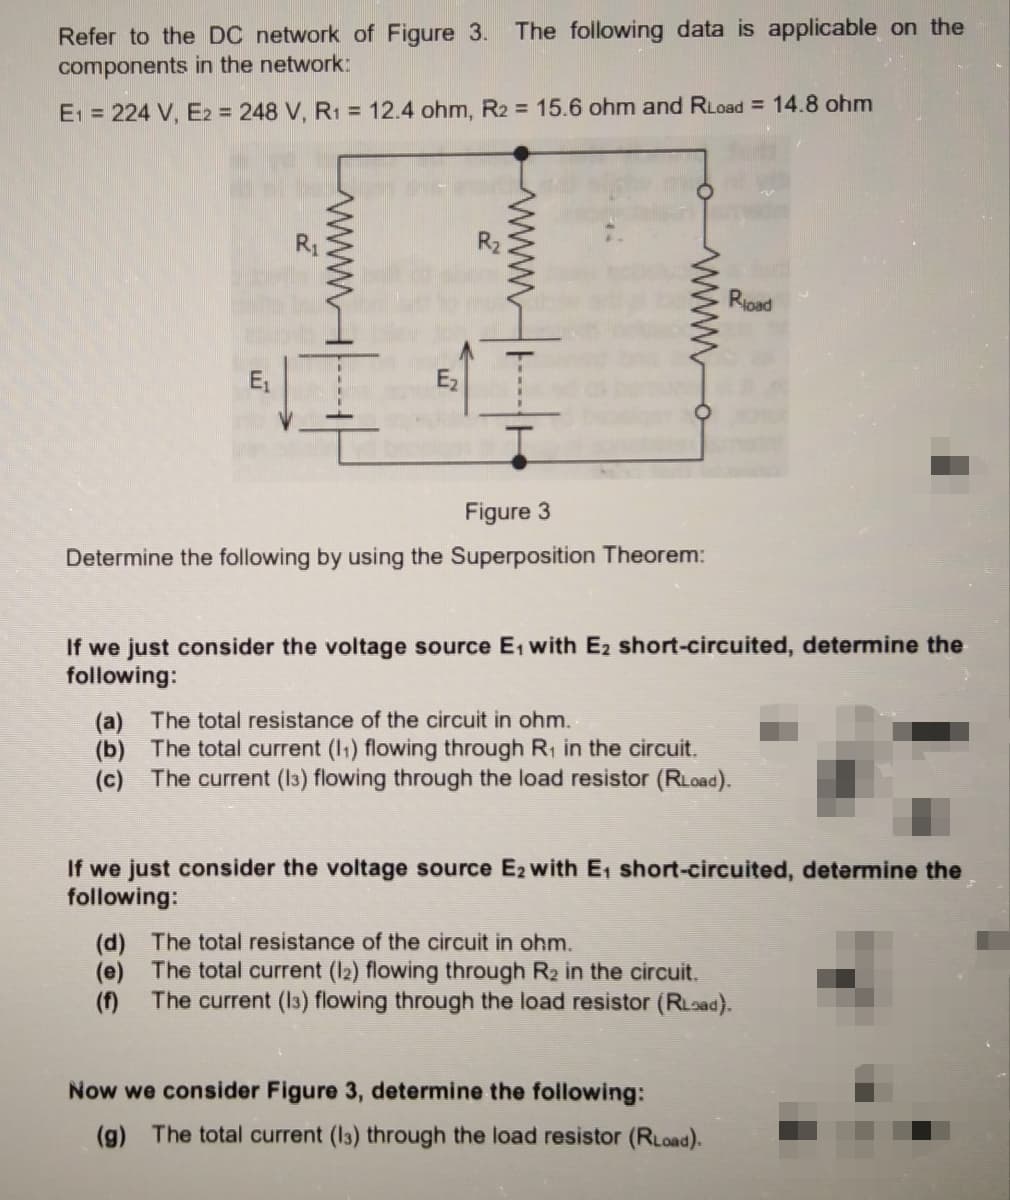 The following data is applicable on the
Refer to the DC network of Figure 3.
components in the network:
E1 = 224 V, E2 = 248 V, R1 = 12.4 ohm, R2 = 15.6 ohm and RLoad = 14.8 ohm
R1
Rioad
E,
Ez
Figure 3
Determine the following by using the Superposition Theorem:
If we just consider the voltage source E, with E2 short-circuited, determine the
following:
(a) The total resistance of the circuit in ohm.
(b) The total current (I1) flowing through R, in the circuit.
(c) The current (I3) flowing through the load resistor (RLoad).
If we just consider the voltage source E2 with E, short-circuited, determine the
following:
(d) The total resistance of the circuit in ohm.
(e) The total current (I2) flowing through R2 in the circuit.
The current (I3) flowing through the load resistor (RLoad).
(f)
Now we consider Figure 3, determine the following:
(g) The total current (I3) through the load resistor (RLoad).
wwwH
